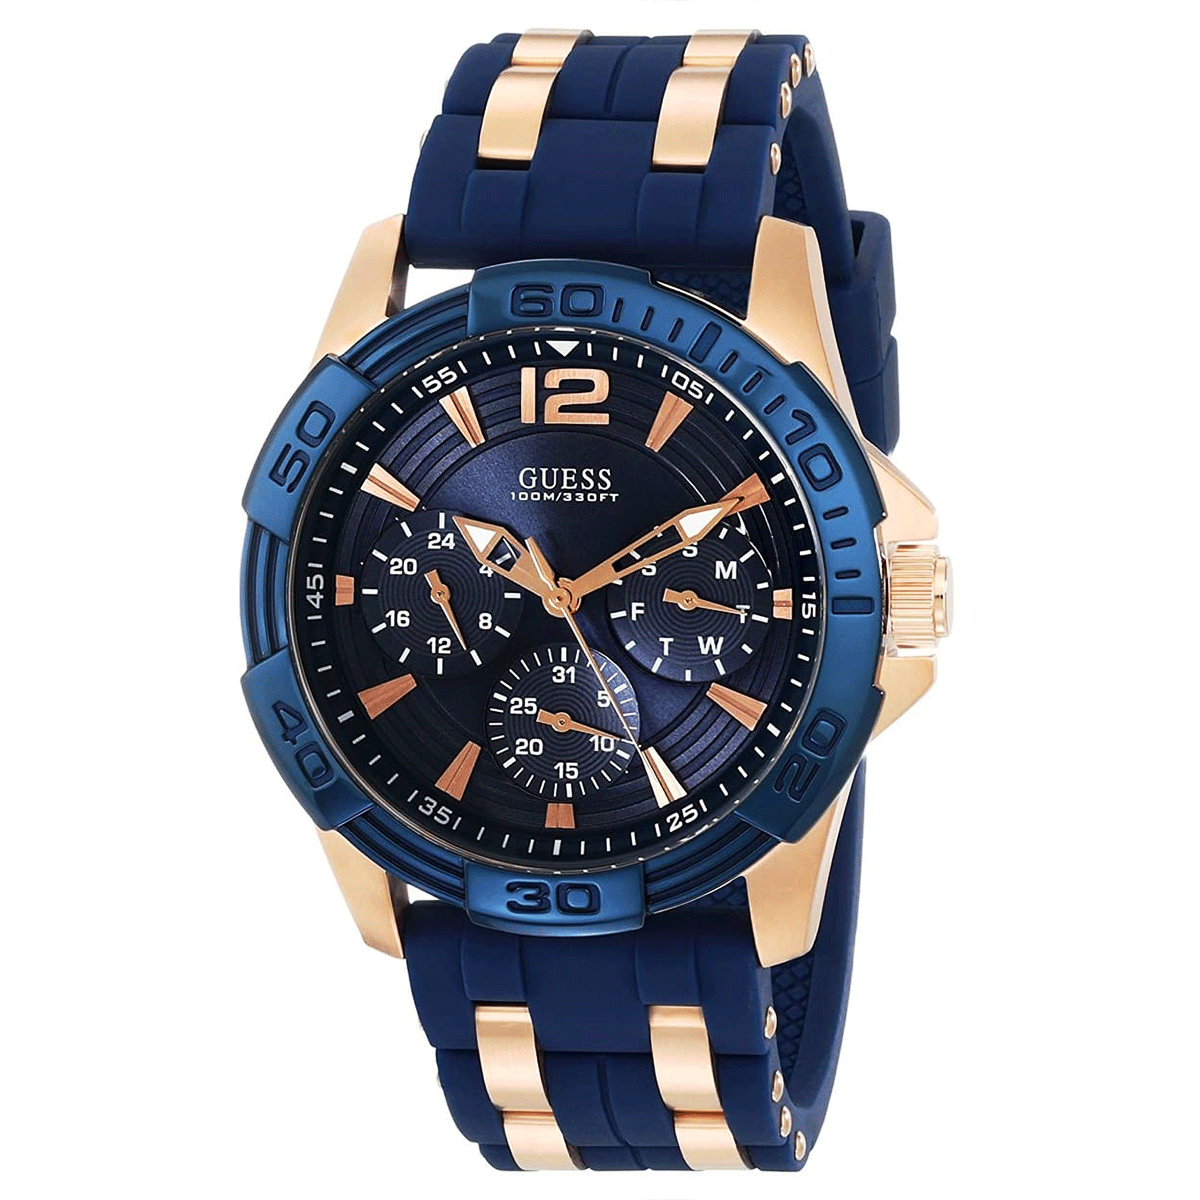 Elegant men watch with blue dial and two colored strap